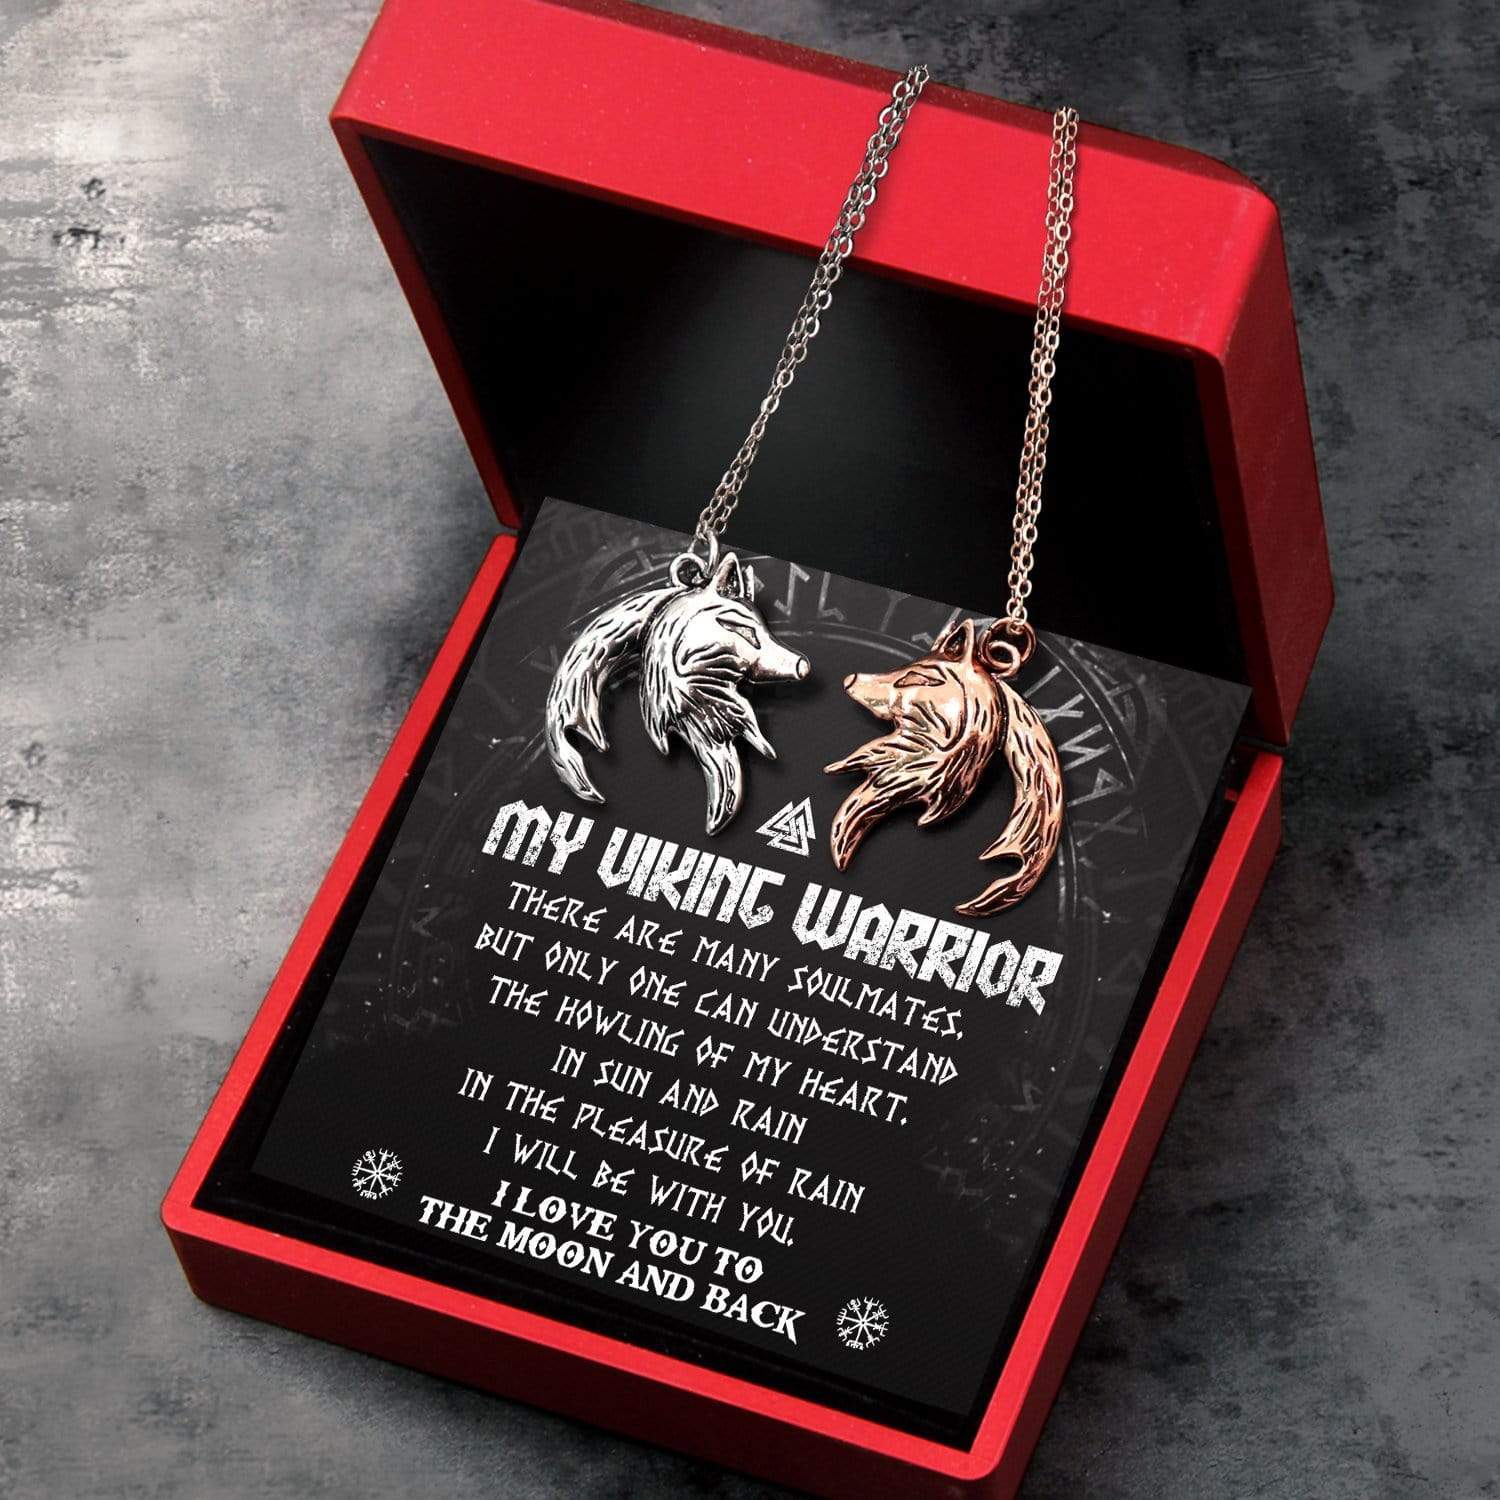 Unleash Your Inner Warrior with the Engraved Viking Wolf Fang Necklace -  Tap into Ancient Wisdom and Courage Shop Now!